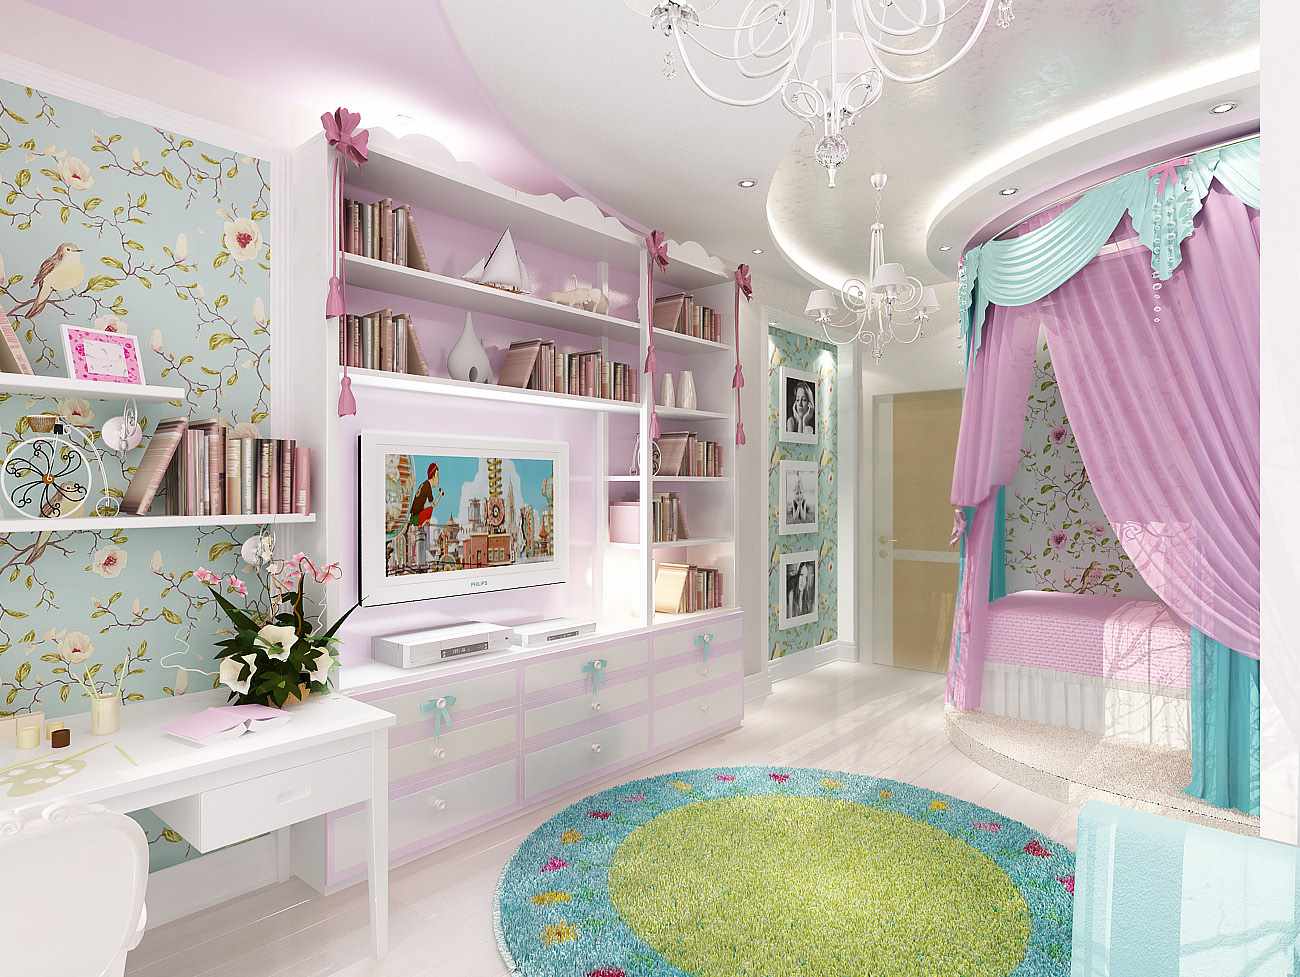 idea of ​​a bright style for a bedroom for a girl